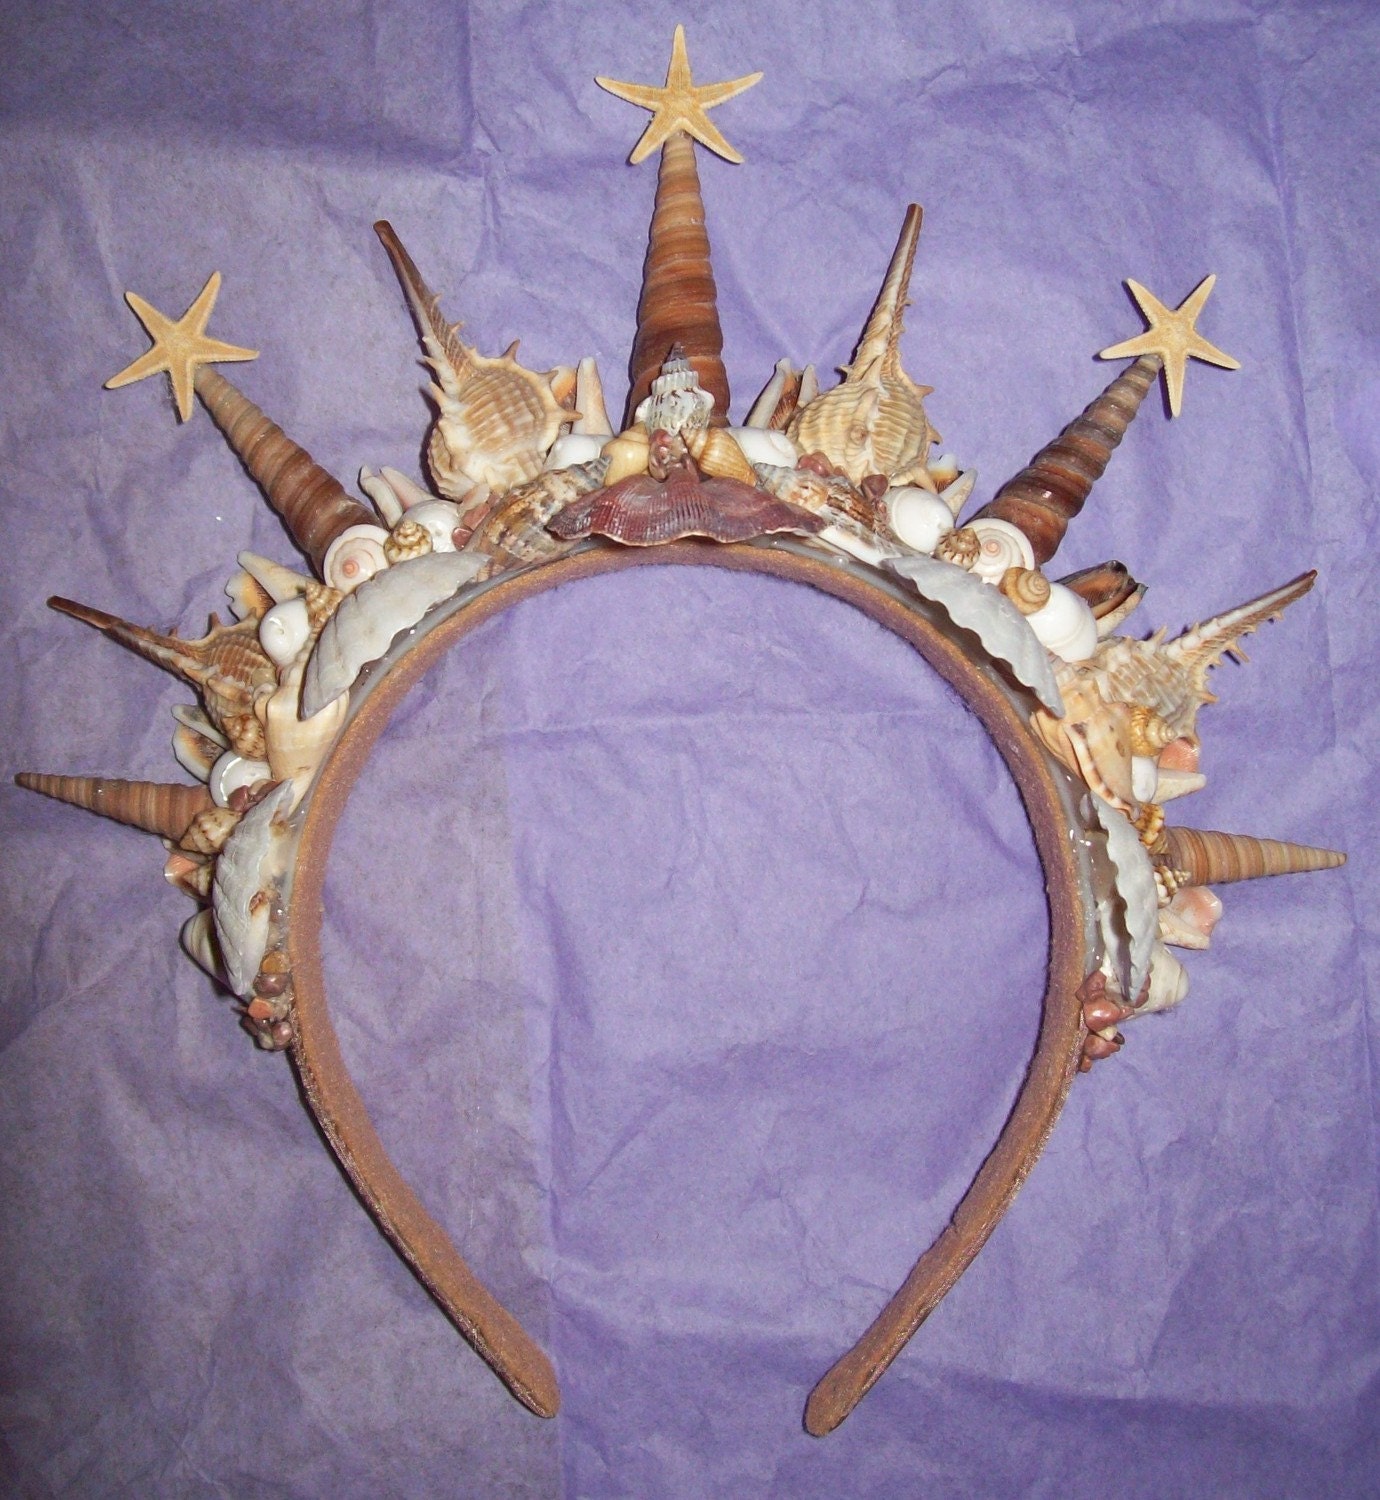 shell crown